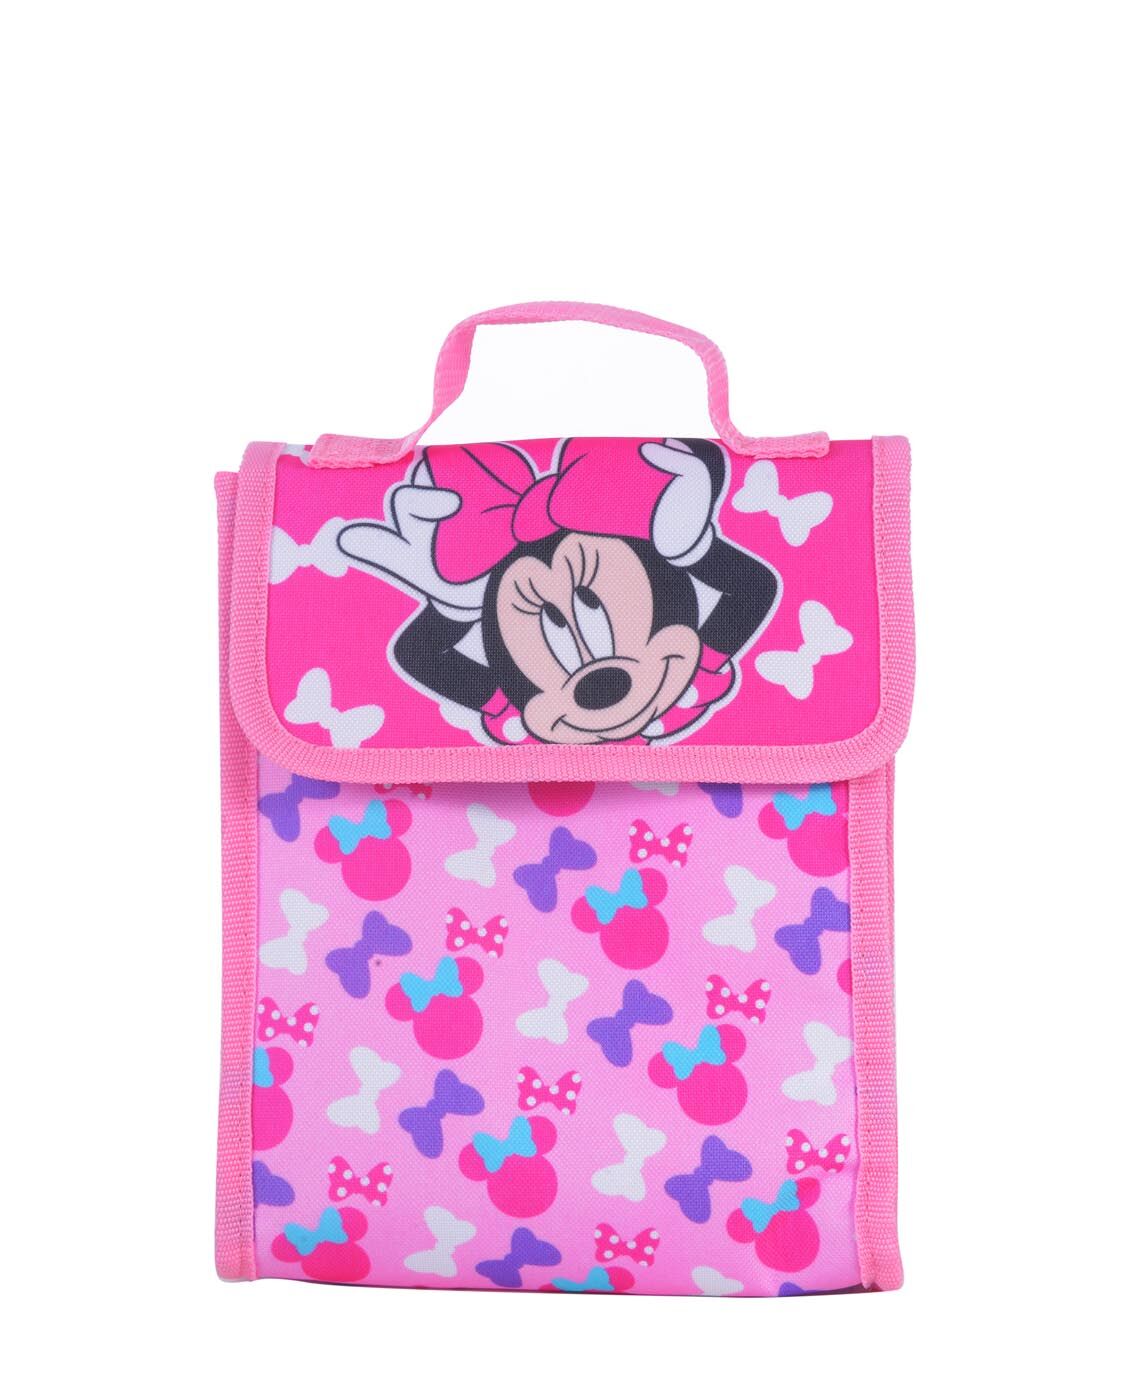 DISNEY GIRLS' MINNIE MOUSE 5-PIECE BACKPACK SET - image 4 of 6